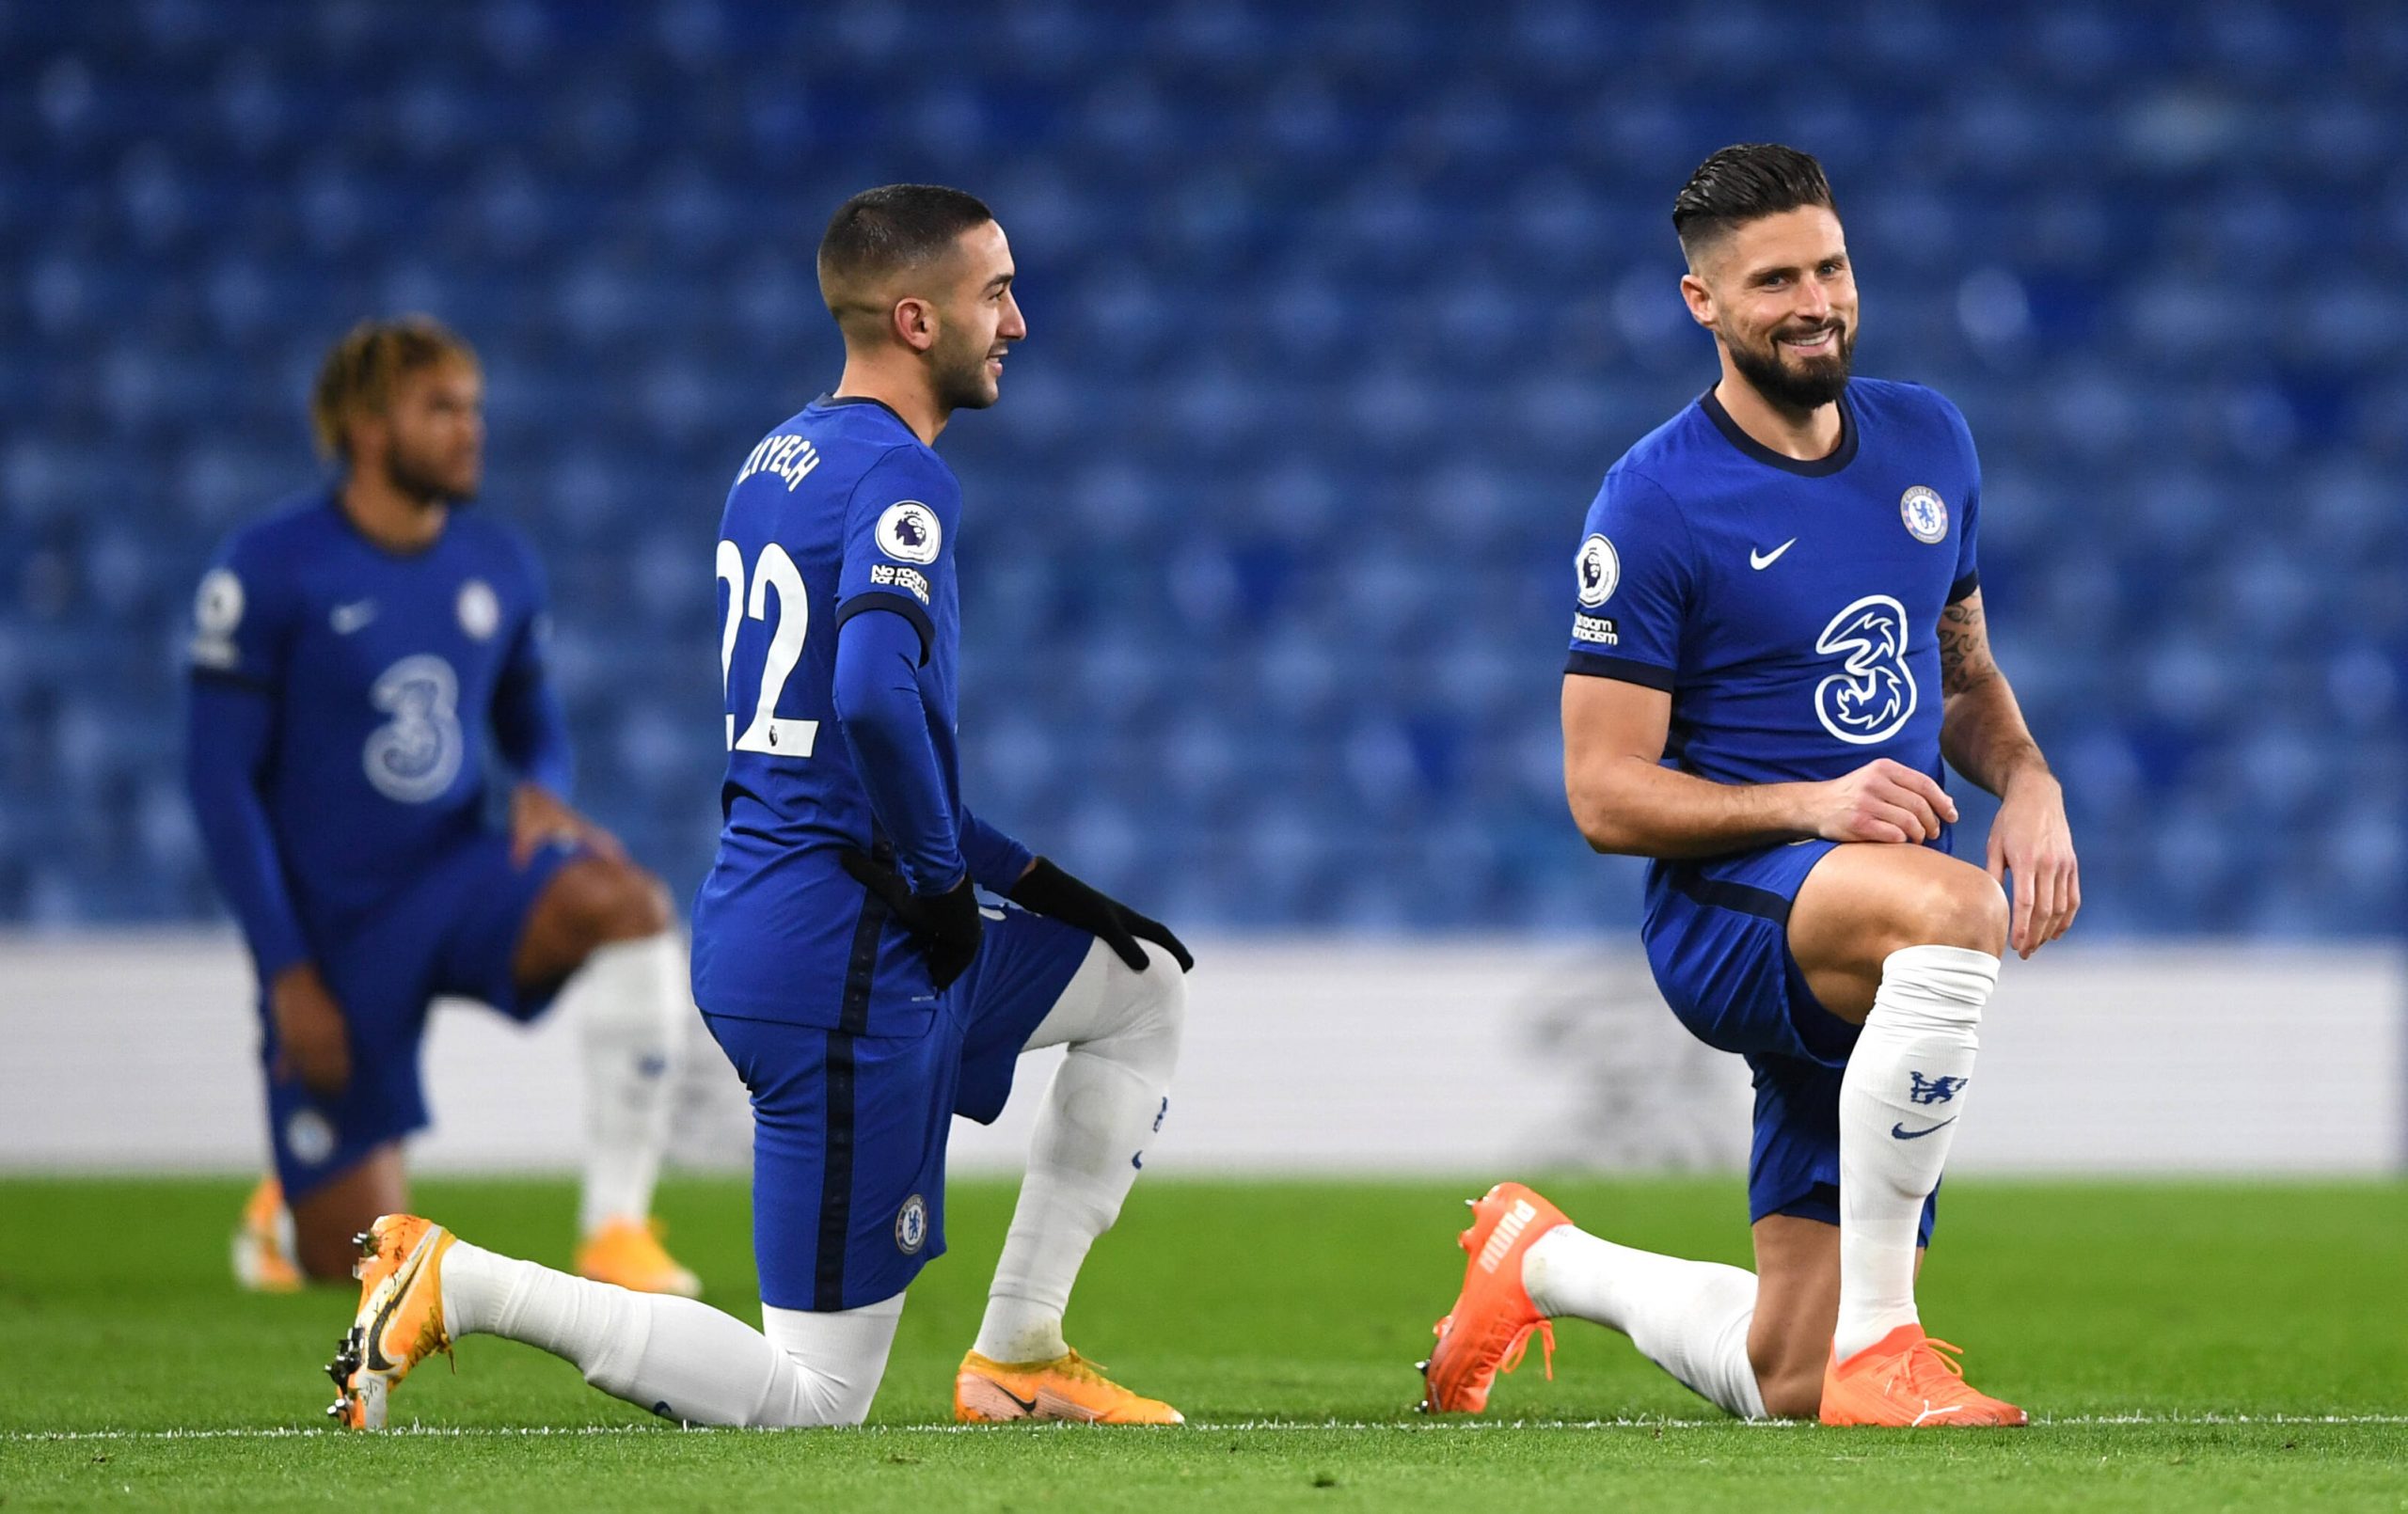 Premier League Transfers: Chelsea winger wants to LEAVE amid interest from Serie A Champions AC Milan, Hakim Ziyech open to join Italian giants - Check out